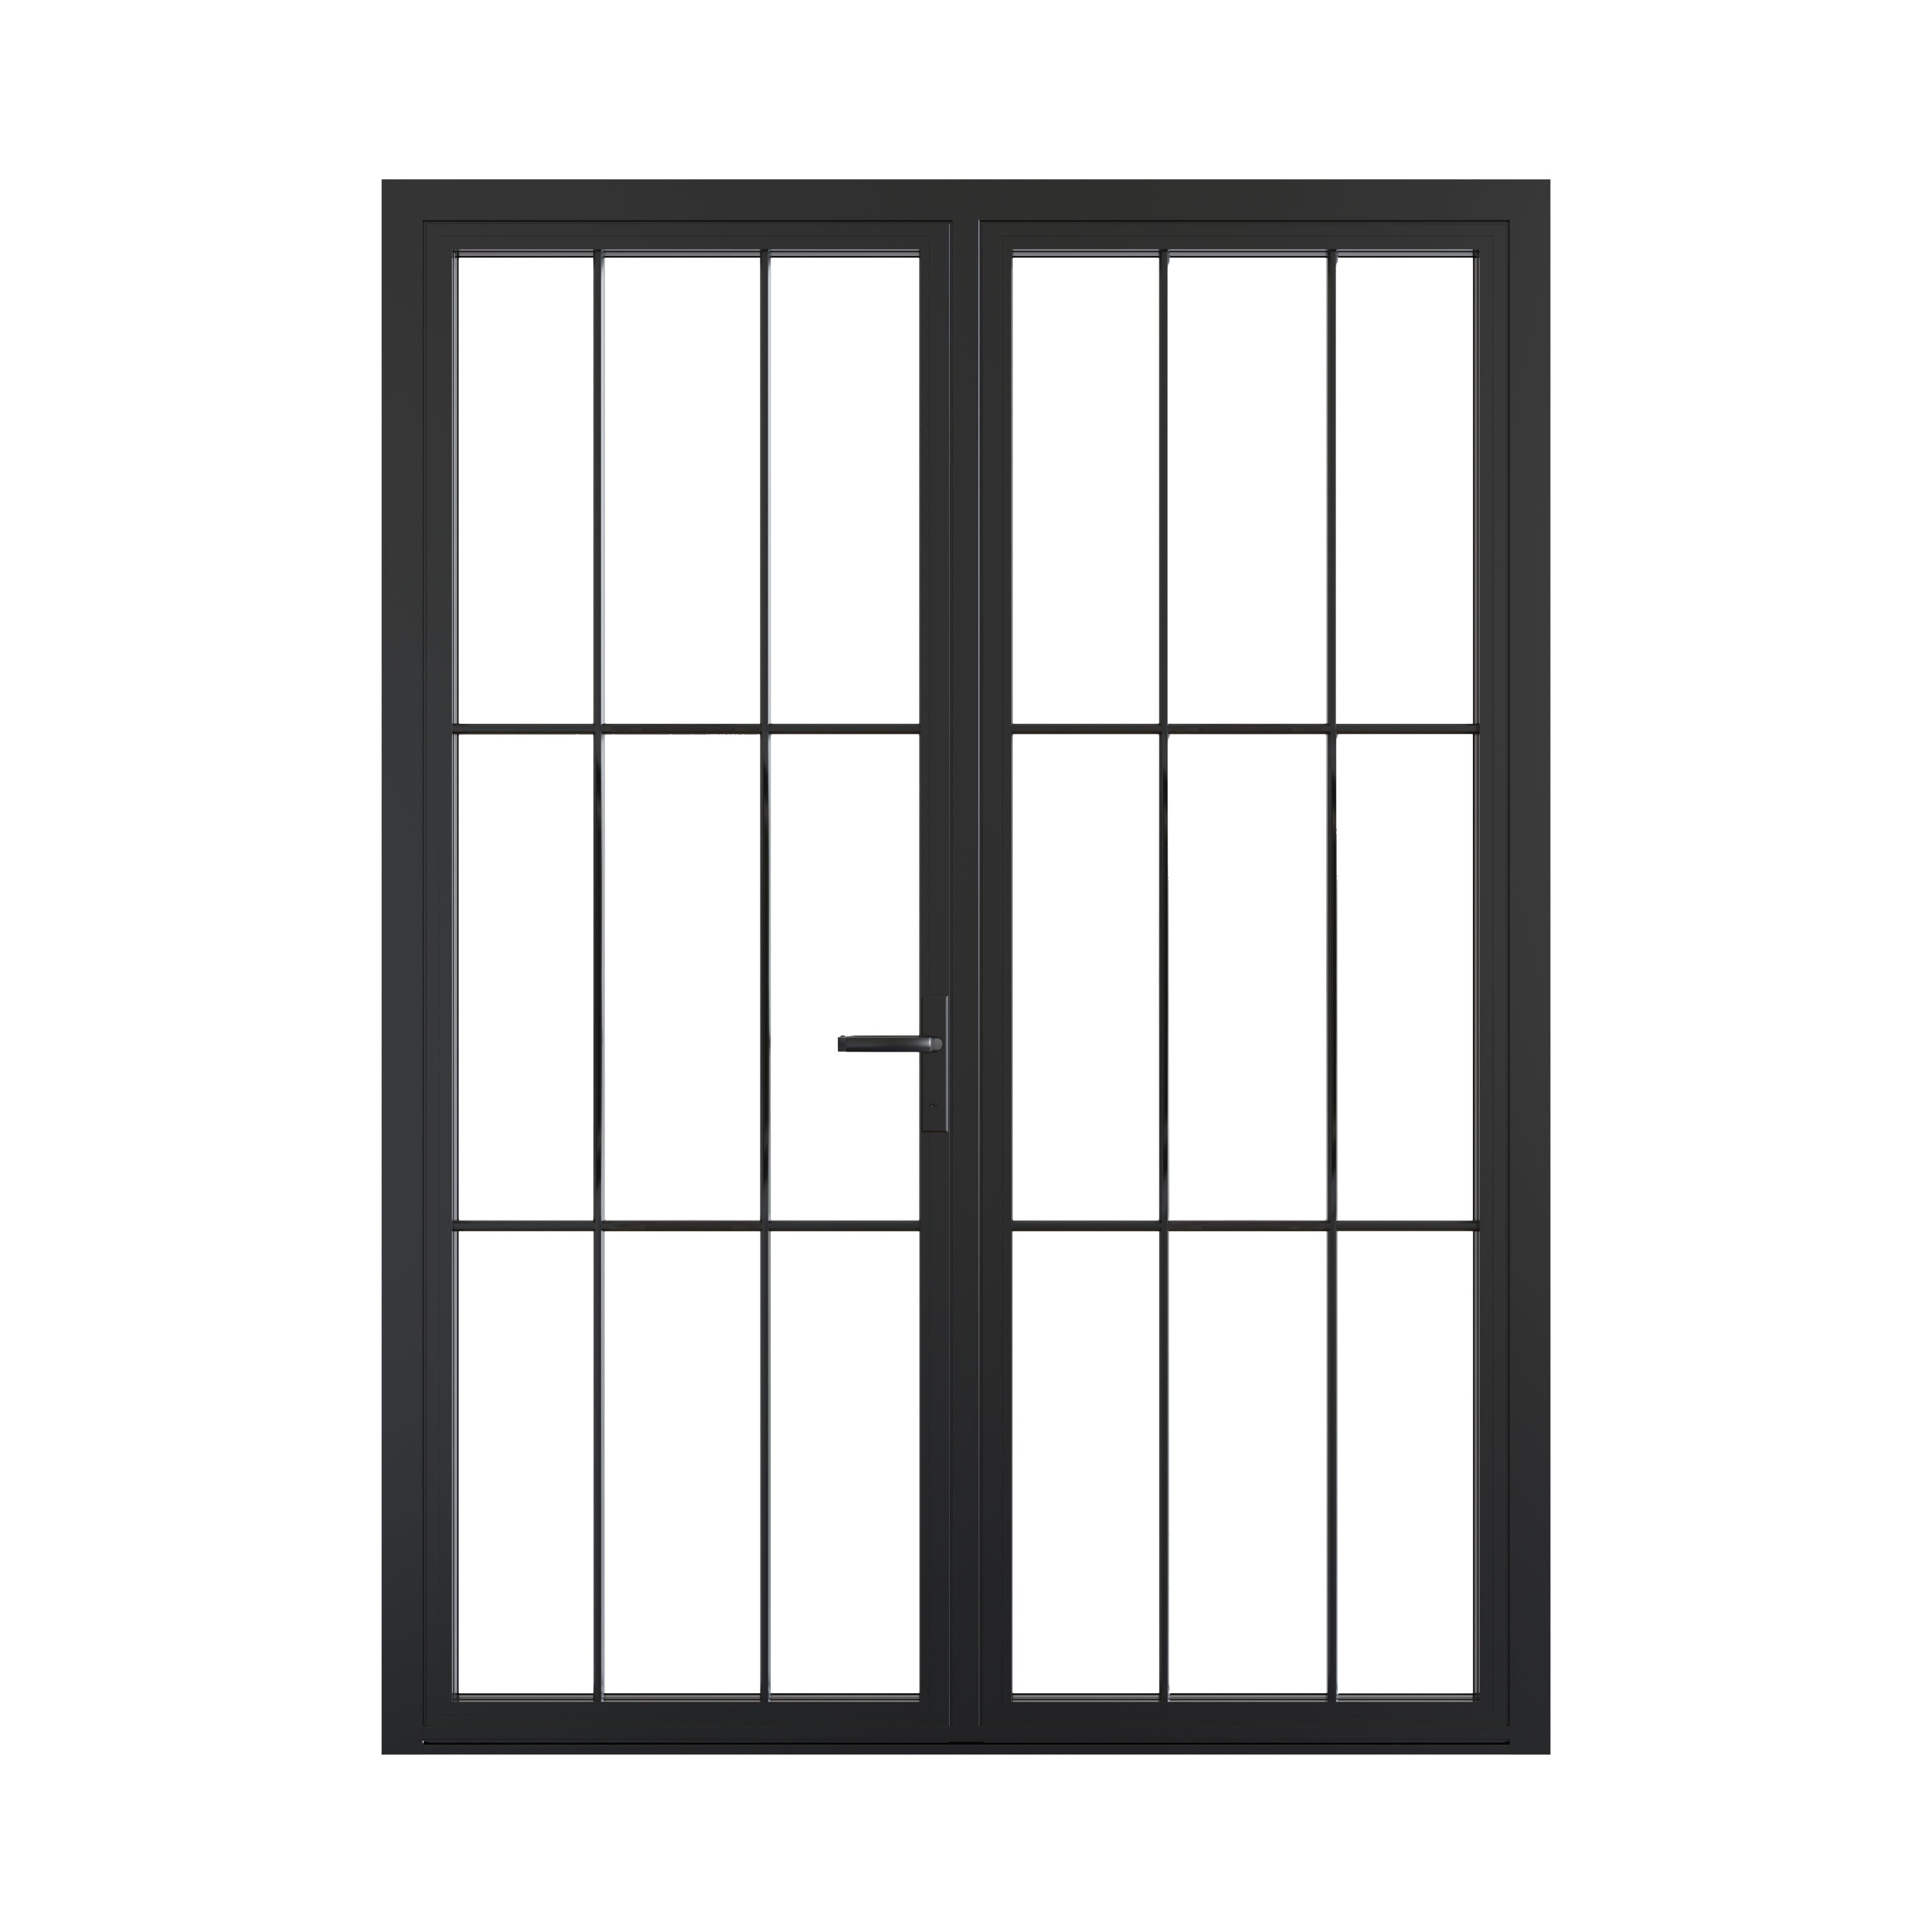 All-Glass Aluminum Metal French Doors